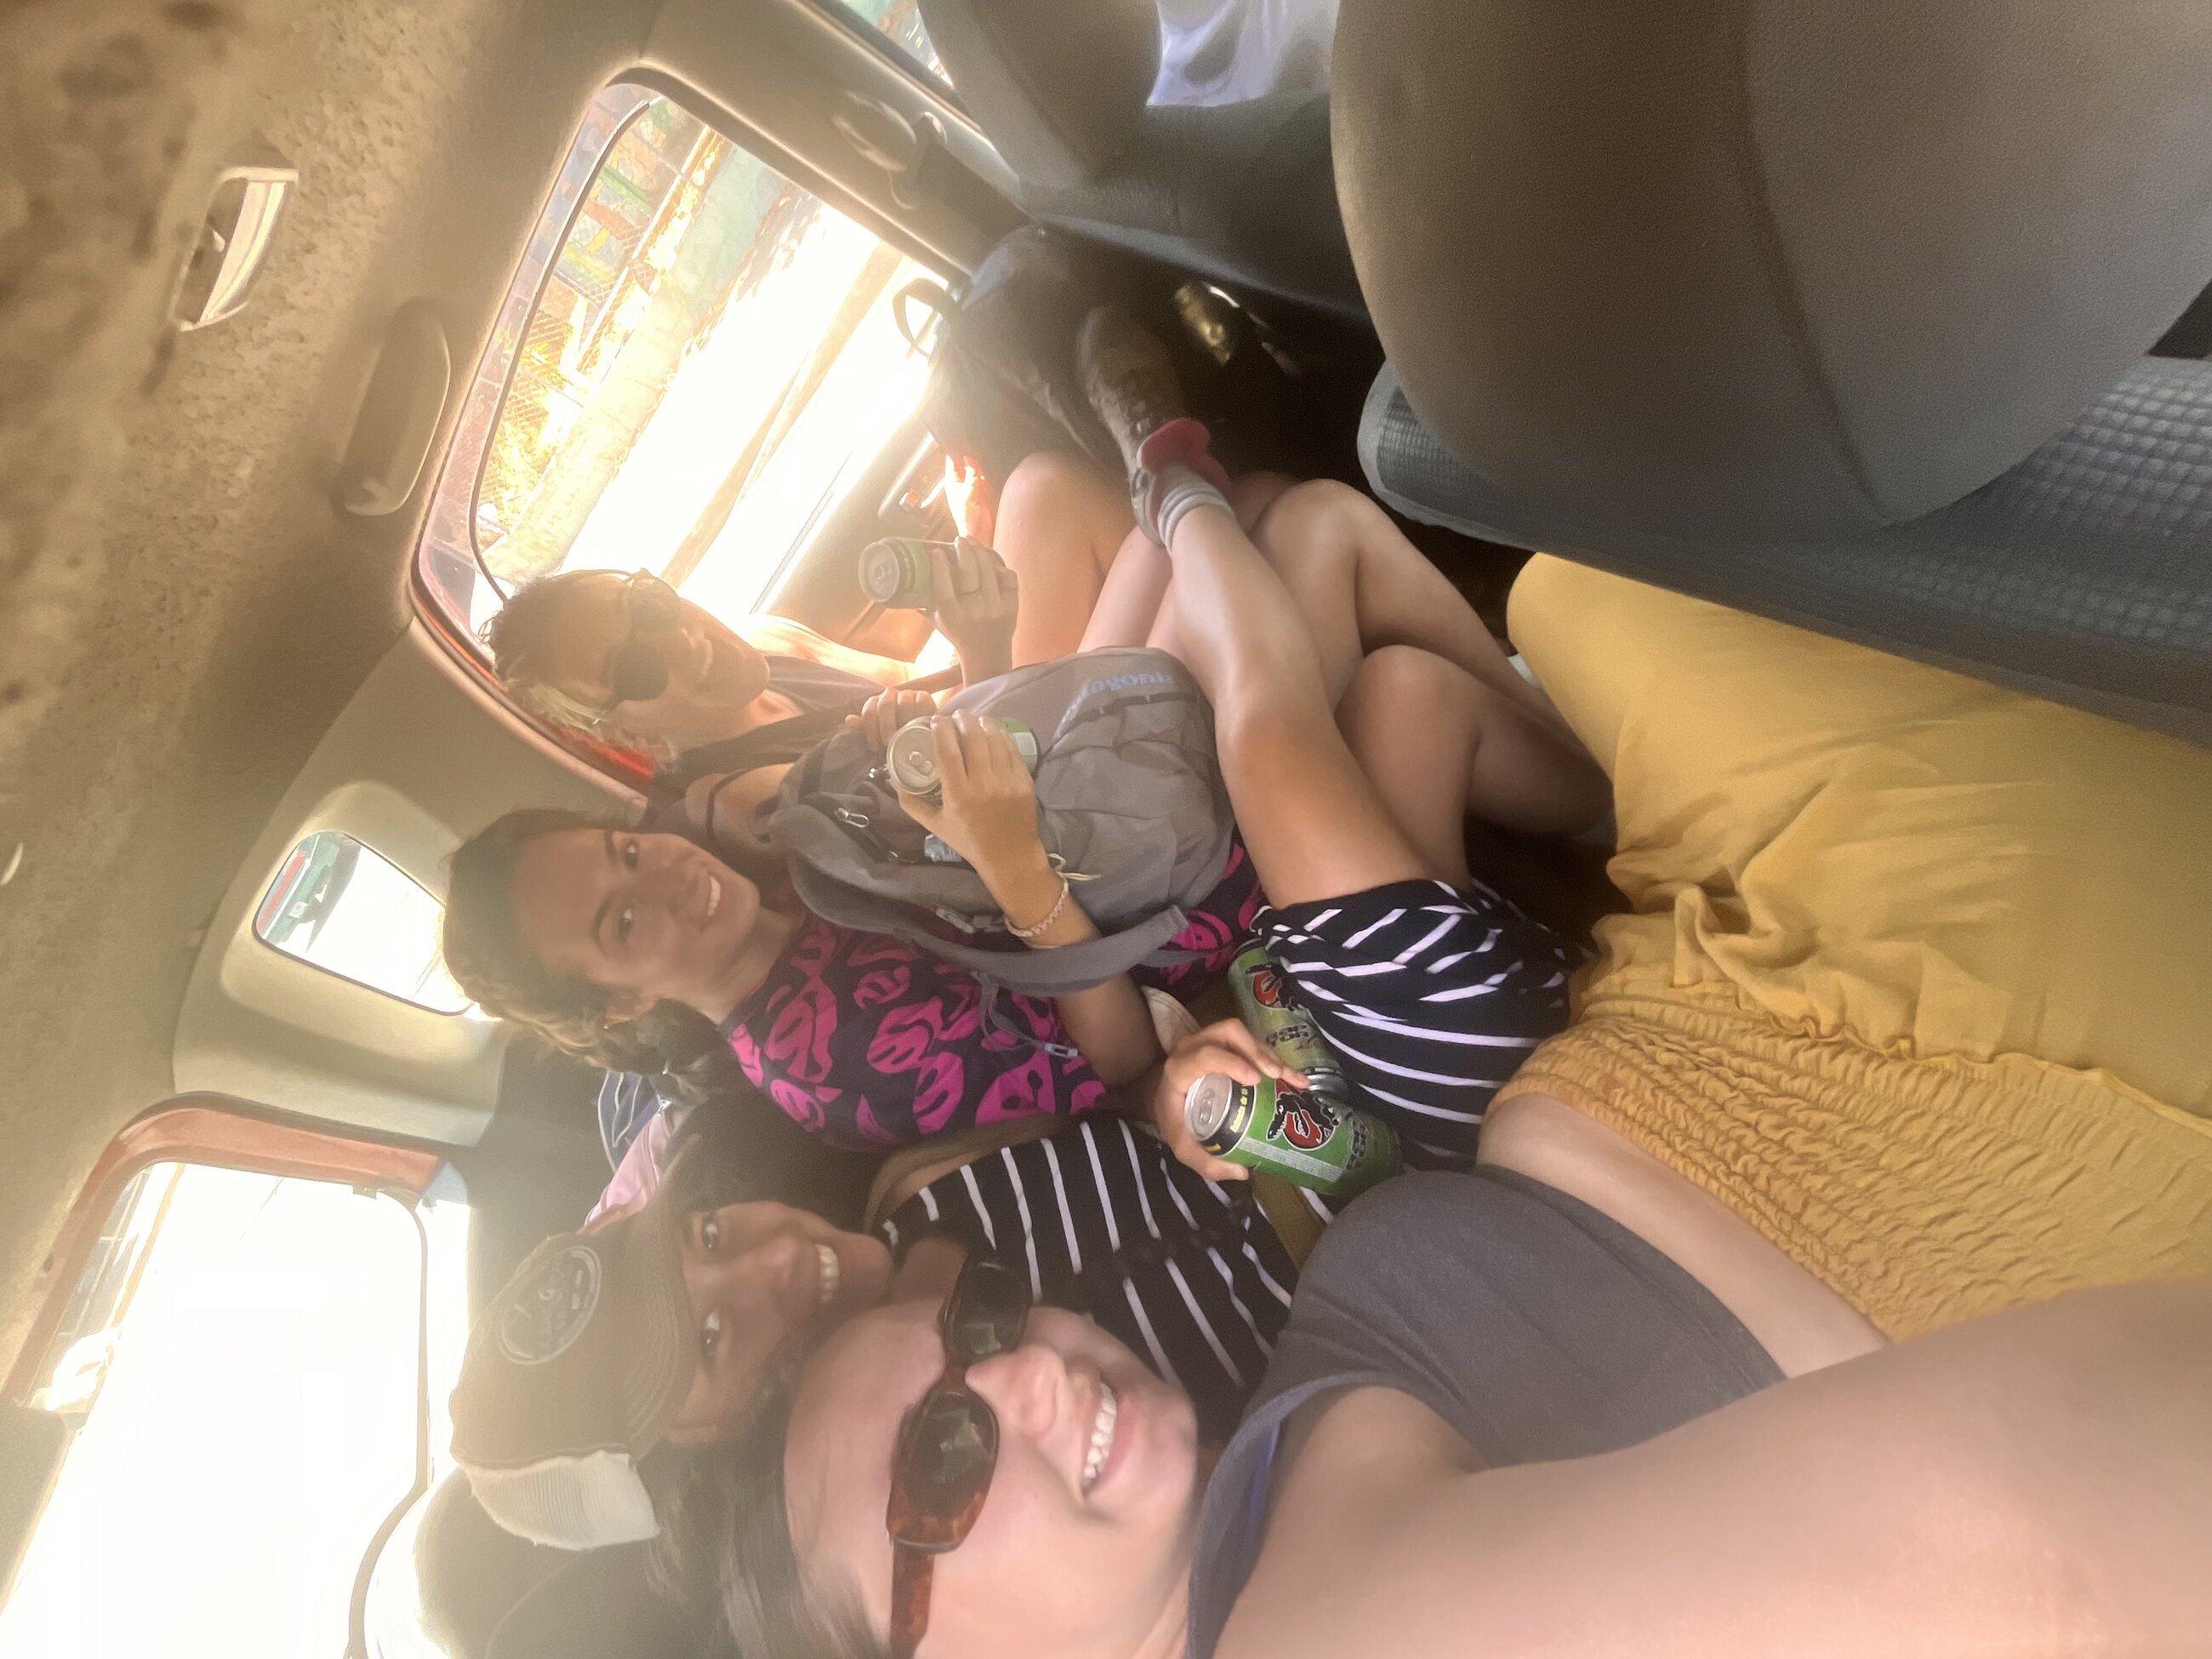 My friends and I cramming 4 people into a 3-person backseat of a taxi in Puntarenas